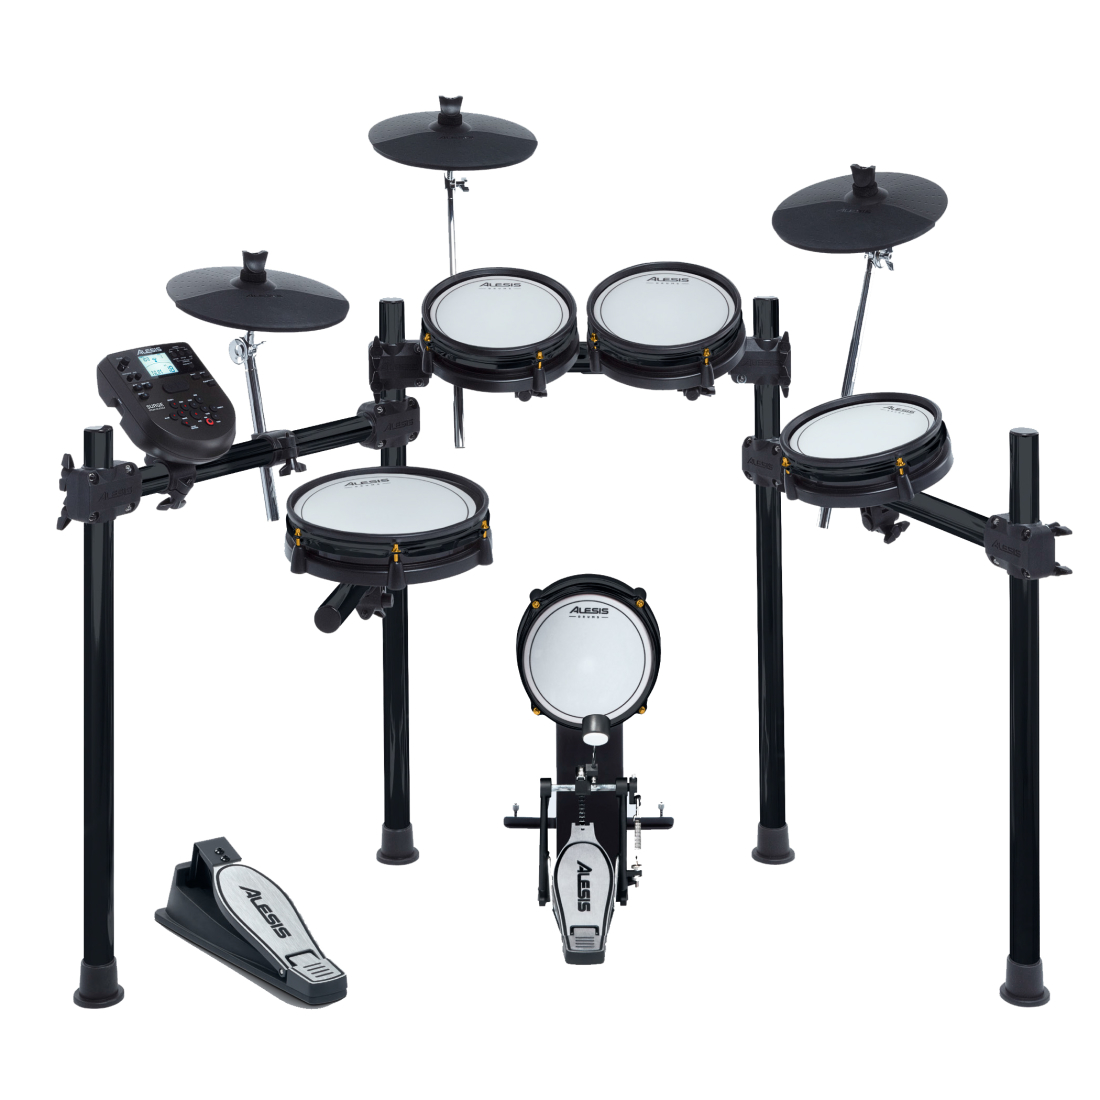 Special Edition Surge 8-Piece Compact Electronic Drum Kit with Mesh Heads